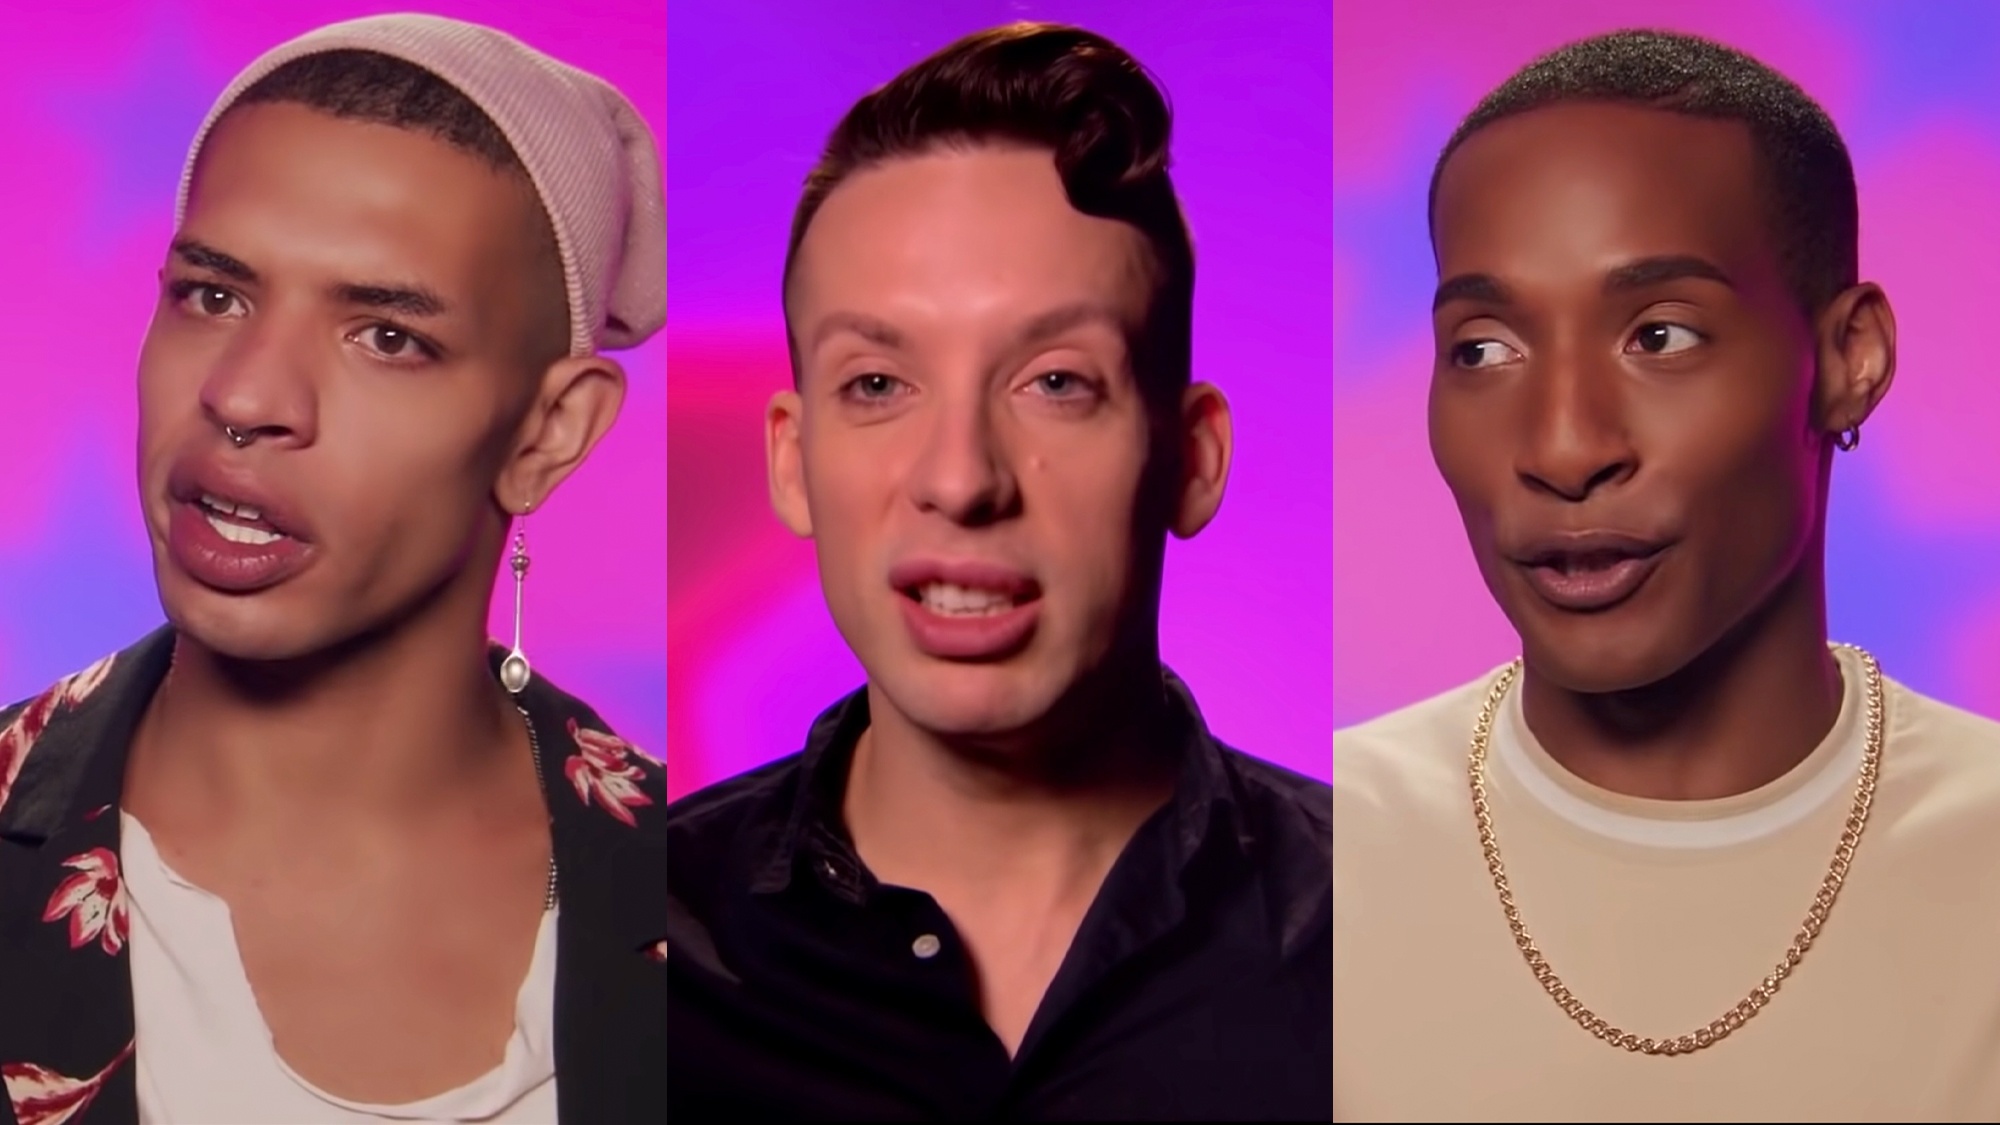 Huge Black Cock Queens - All These 'Drag Race' Queens Apparently Have Huge Dicks - TheSword.com